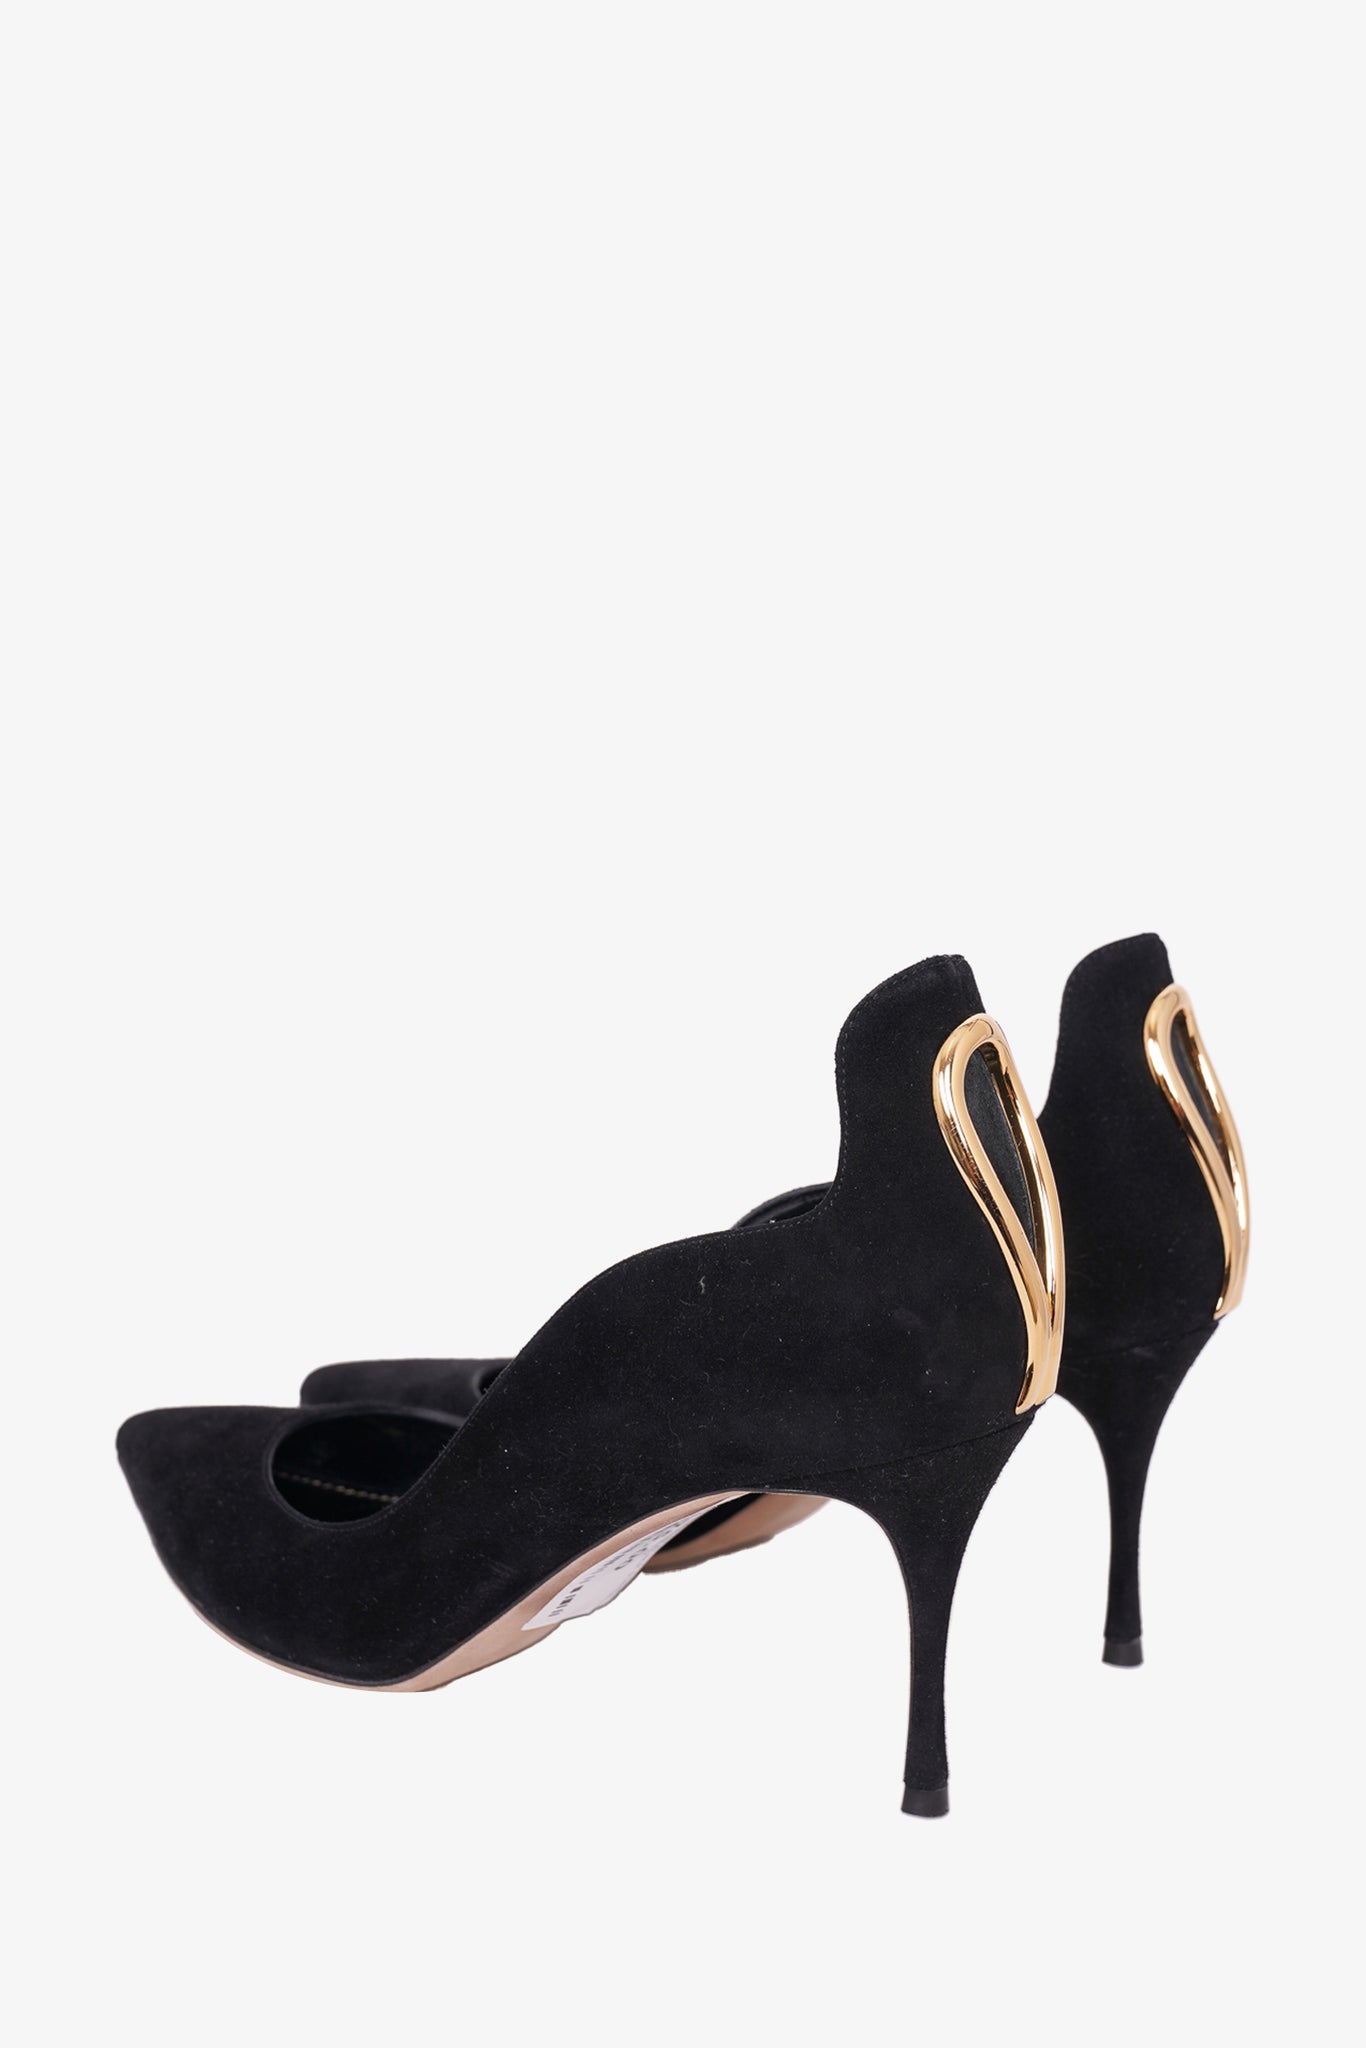 Sergio Rossi Black Suede Cut Out Heels Size 40